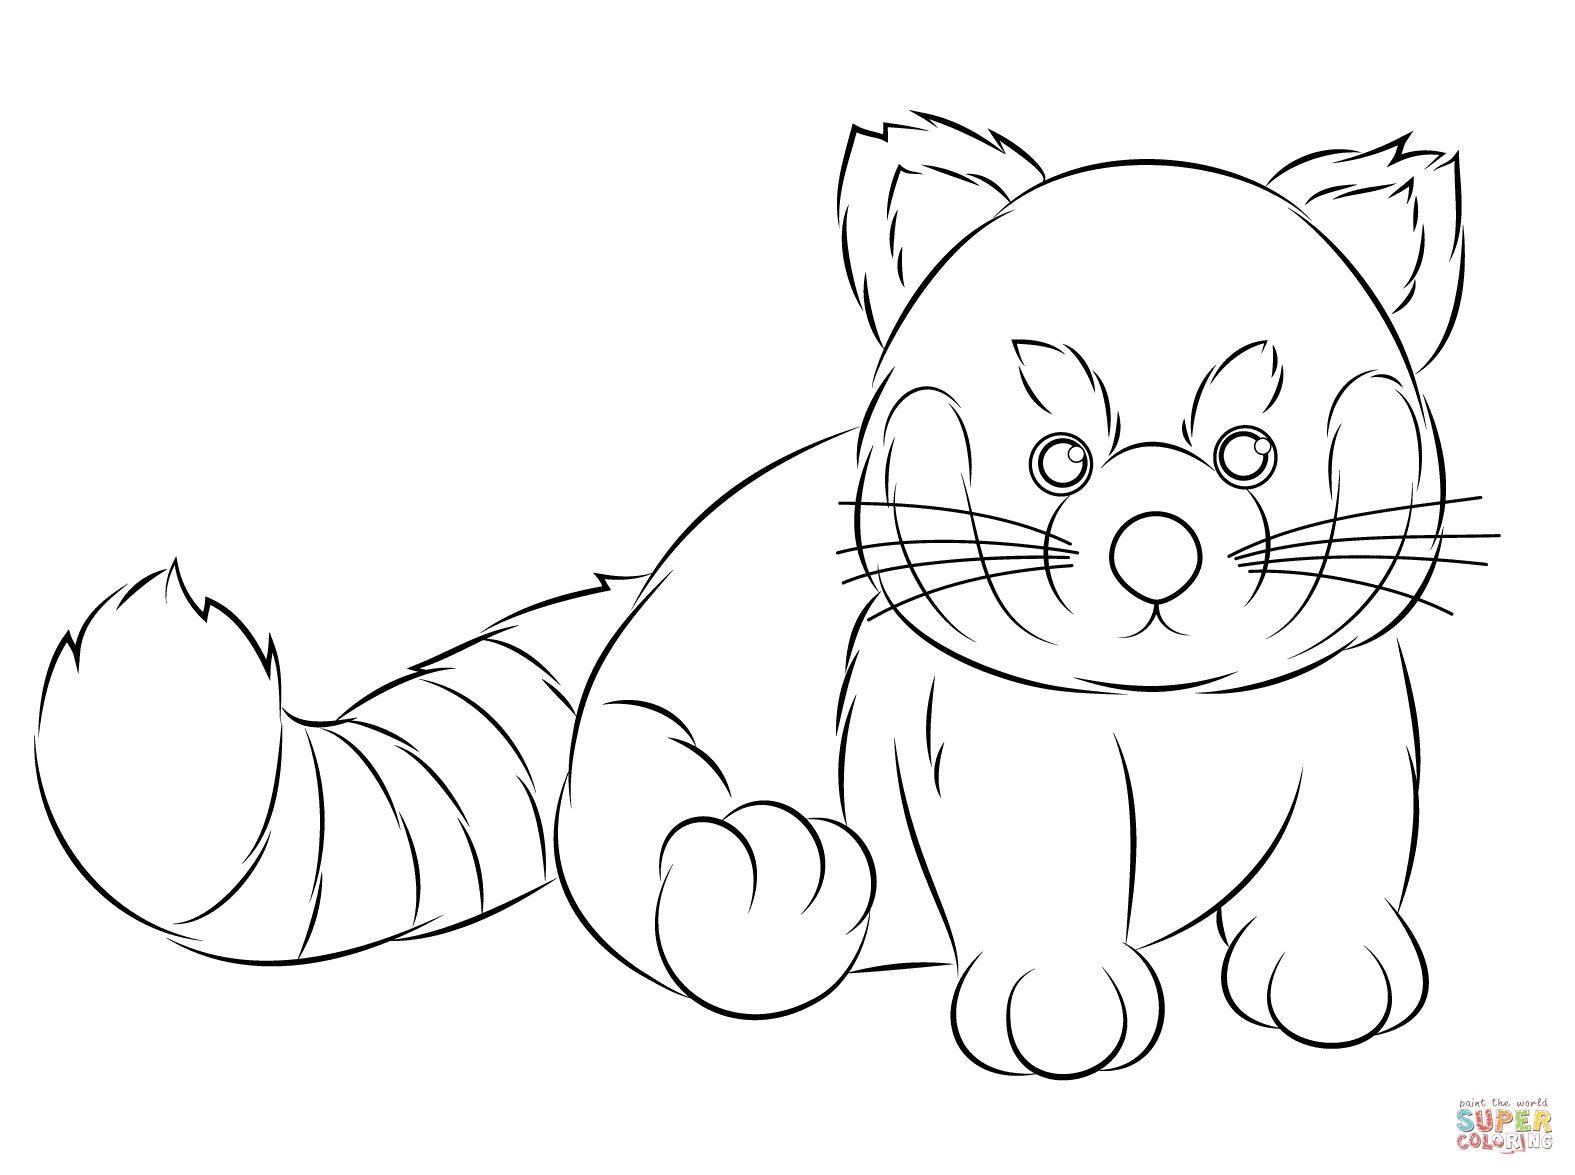 Webkinz Red Panda coloring page | Free Printable Coloring Pages